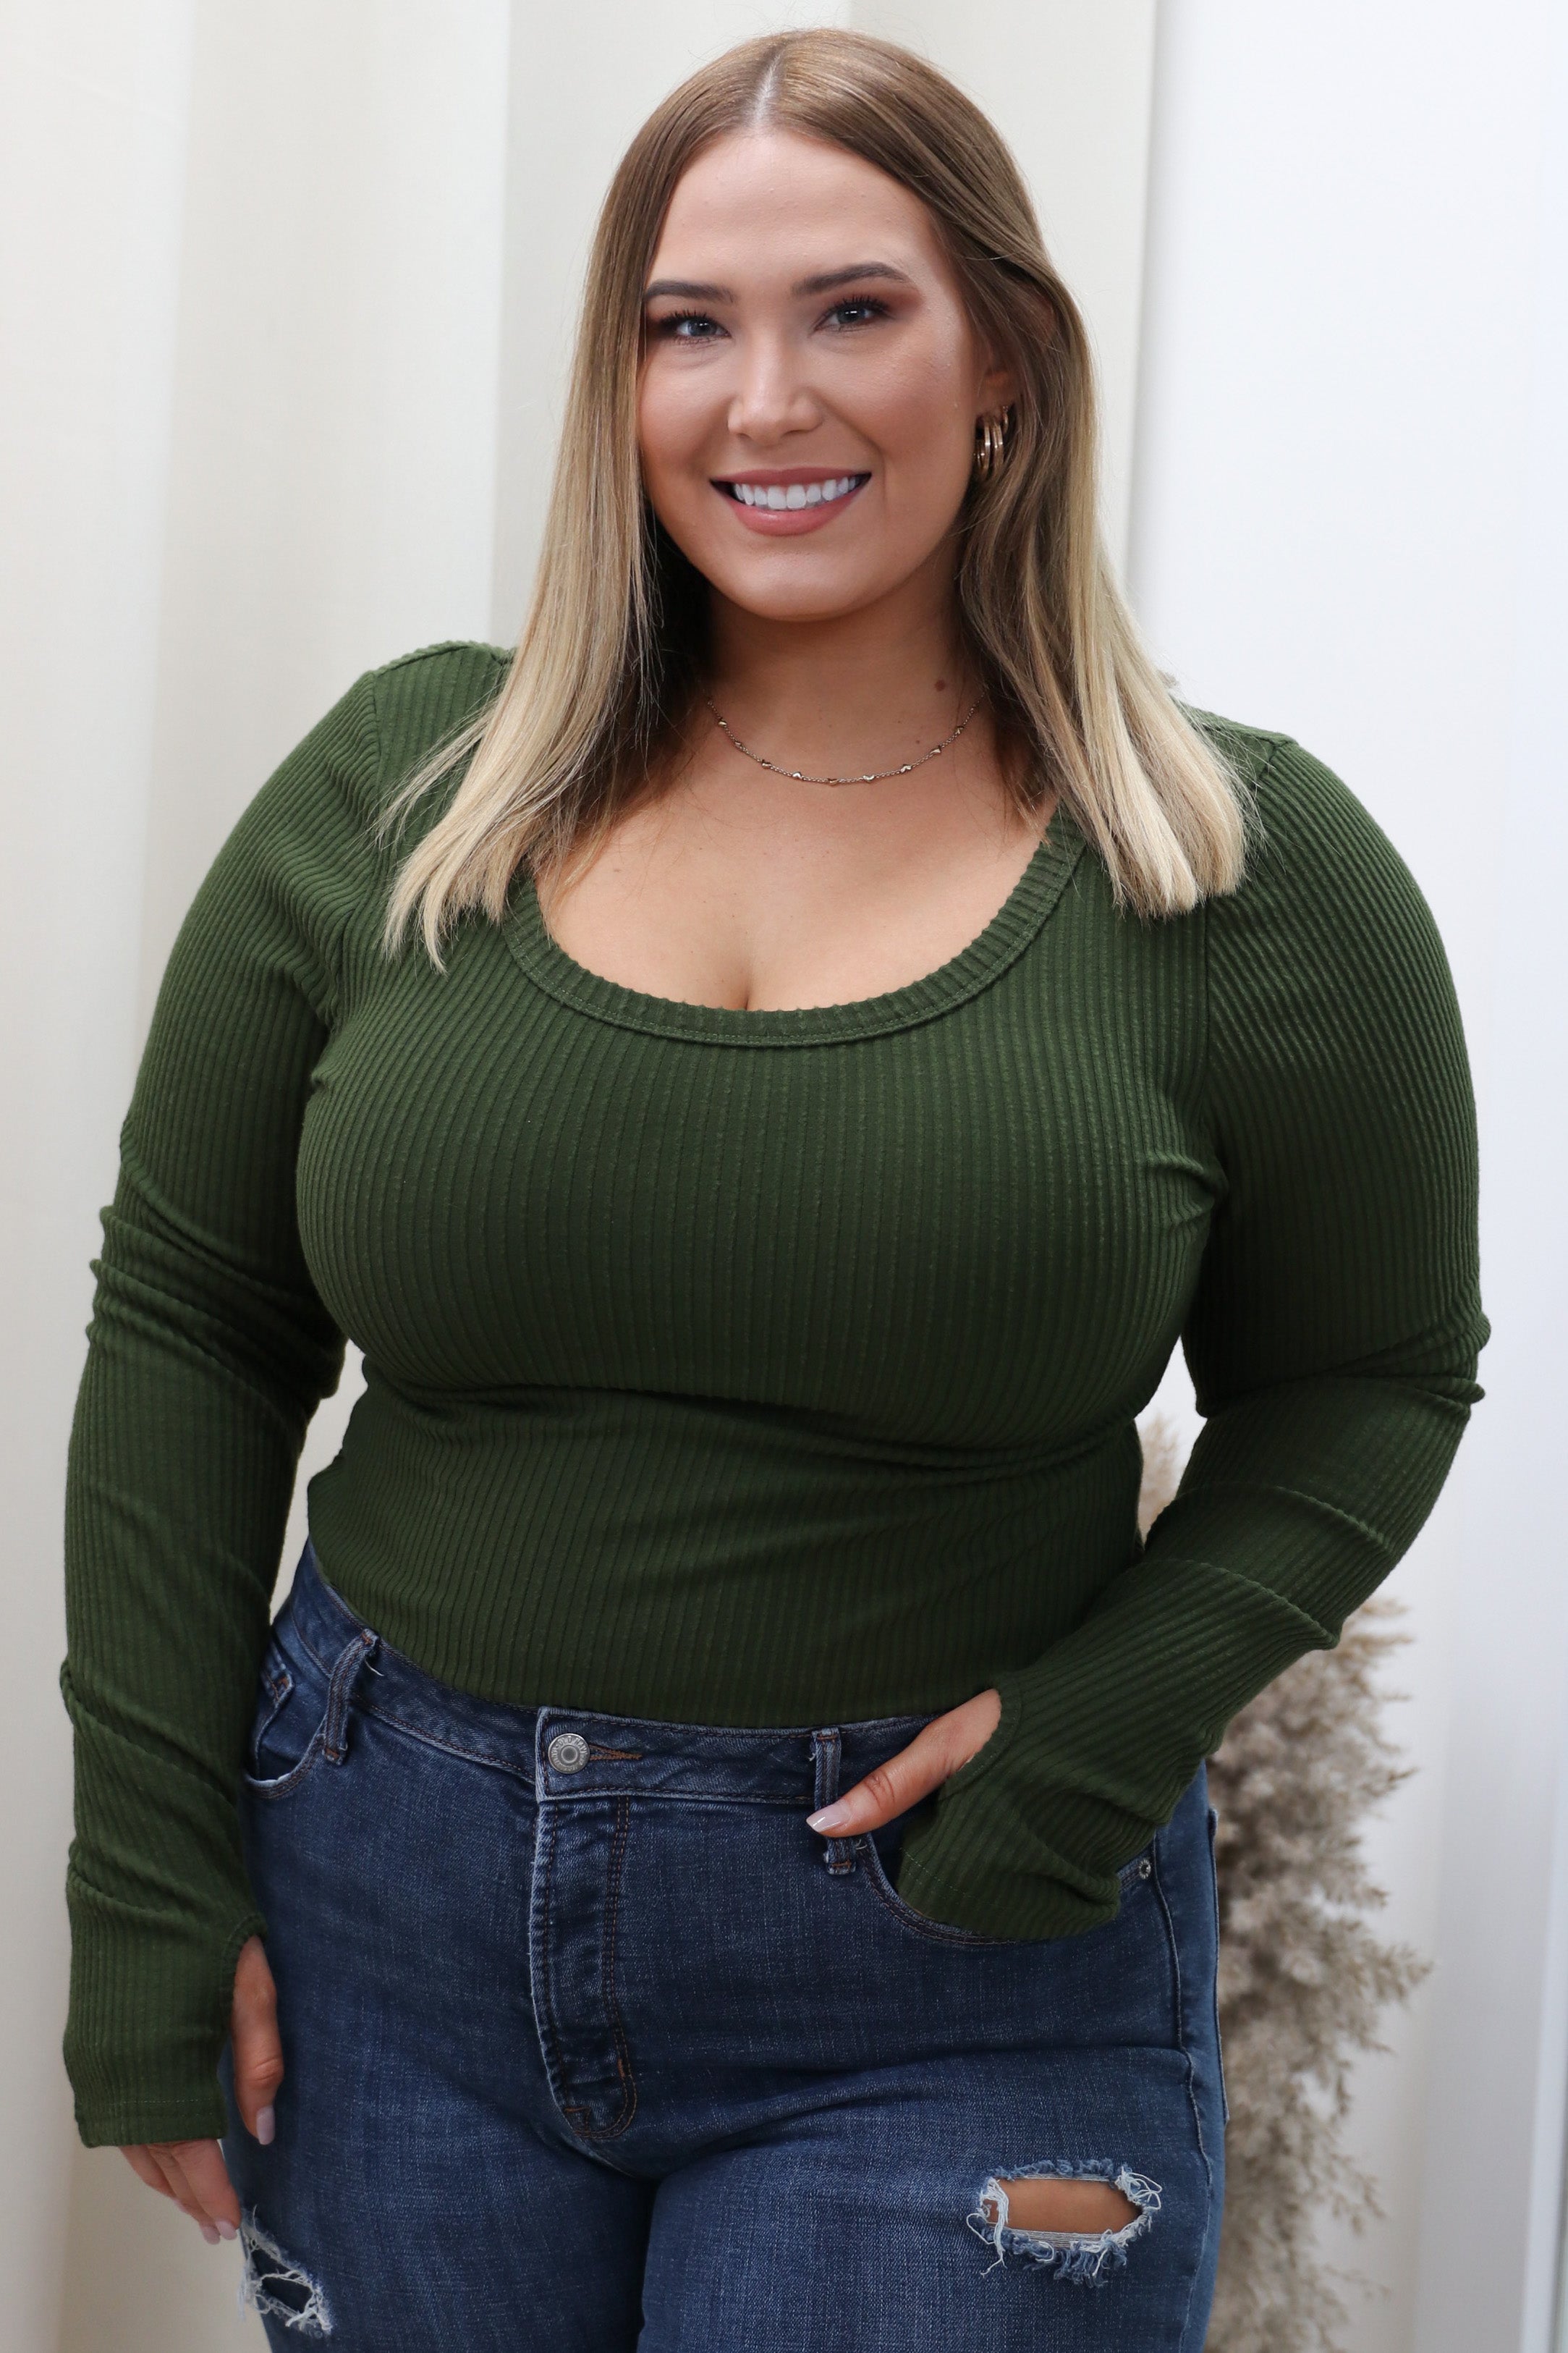 Curvy Girl – Happily Ever Aften